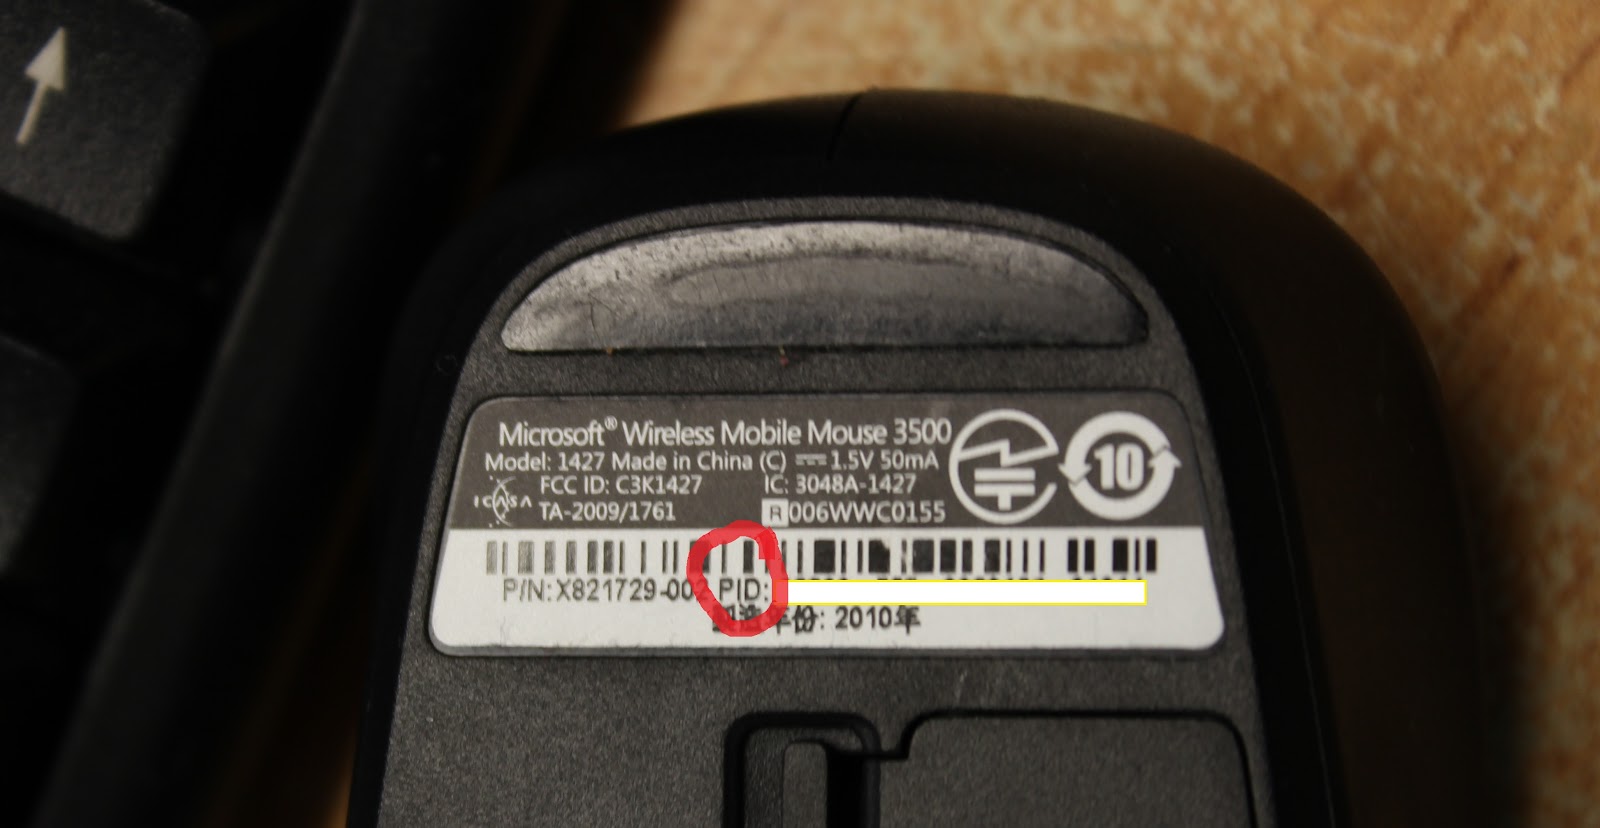 Michael Dornisch: Replace a missing Microsoft Wireless Mouse Transceiver